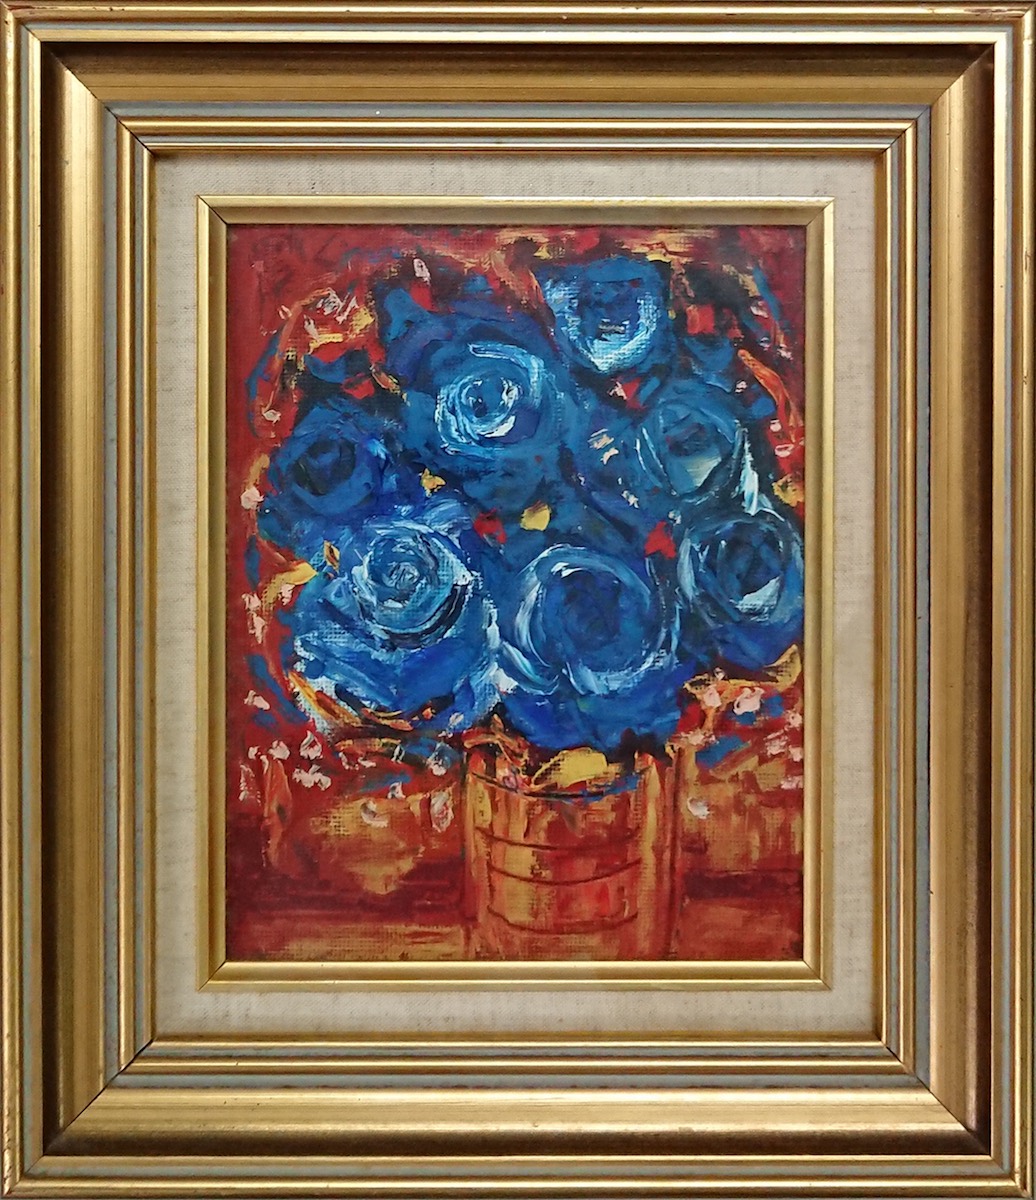 Blue Roses by Yap Hong Ngee